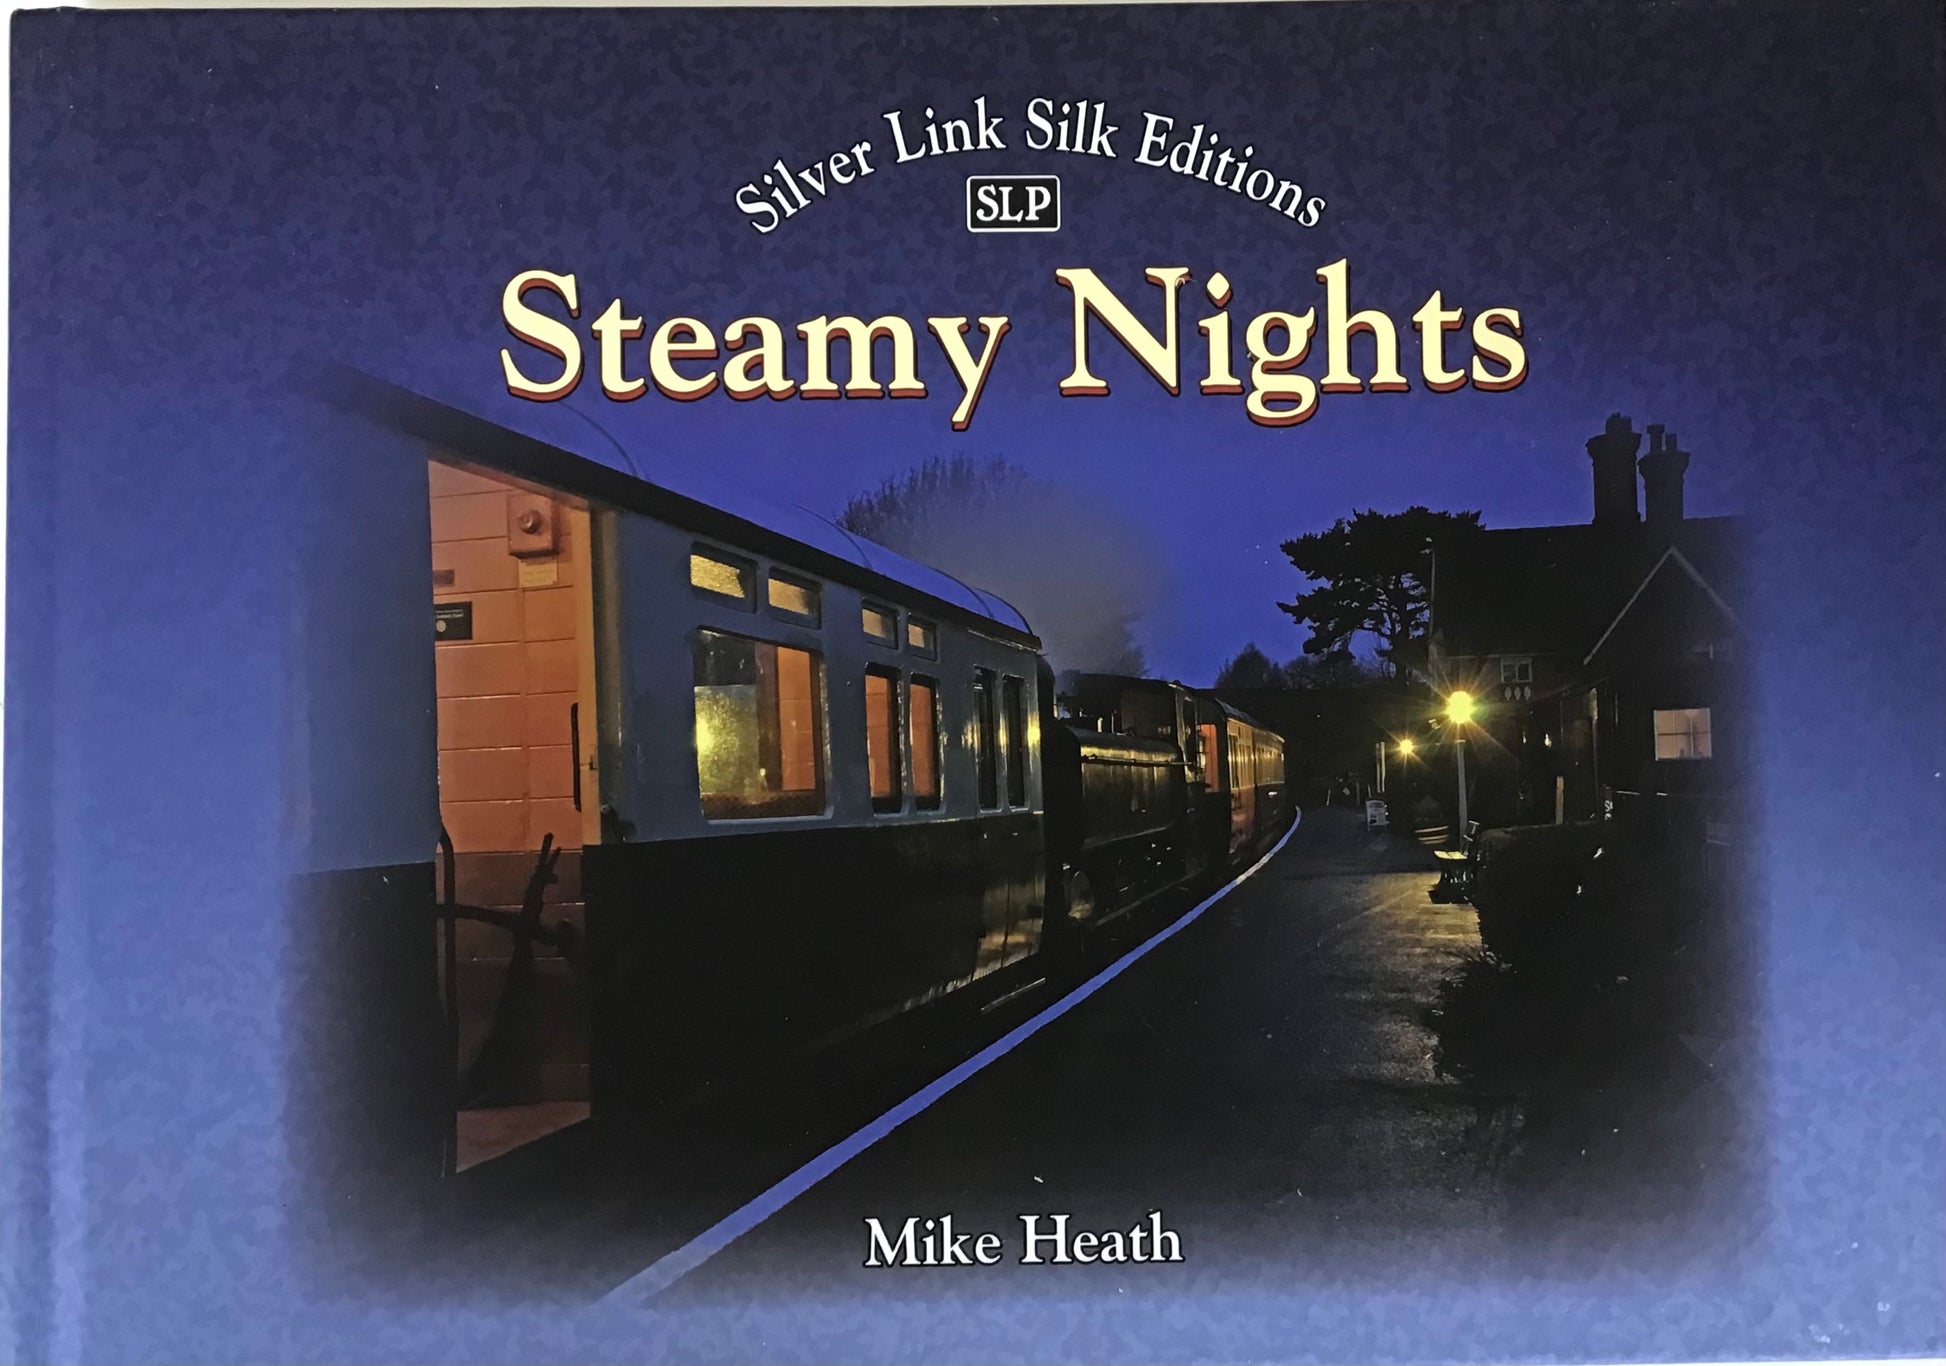 Steamy Nights: Steam Railway Preservation by Night - Mike Heath - Chester Model Centre